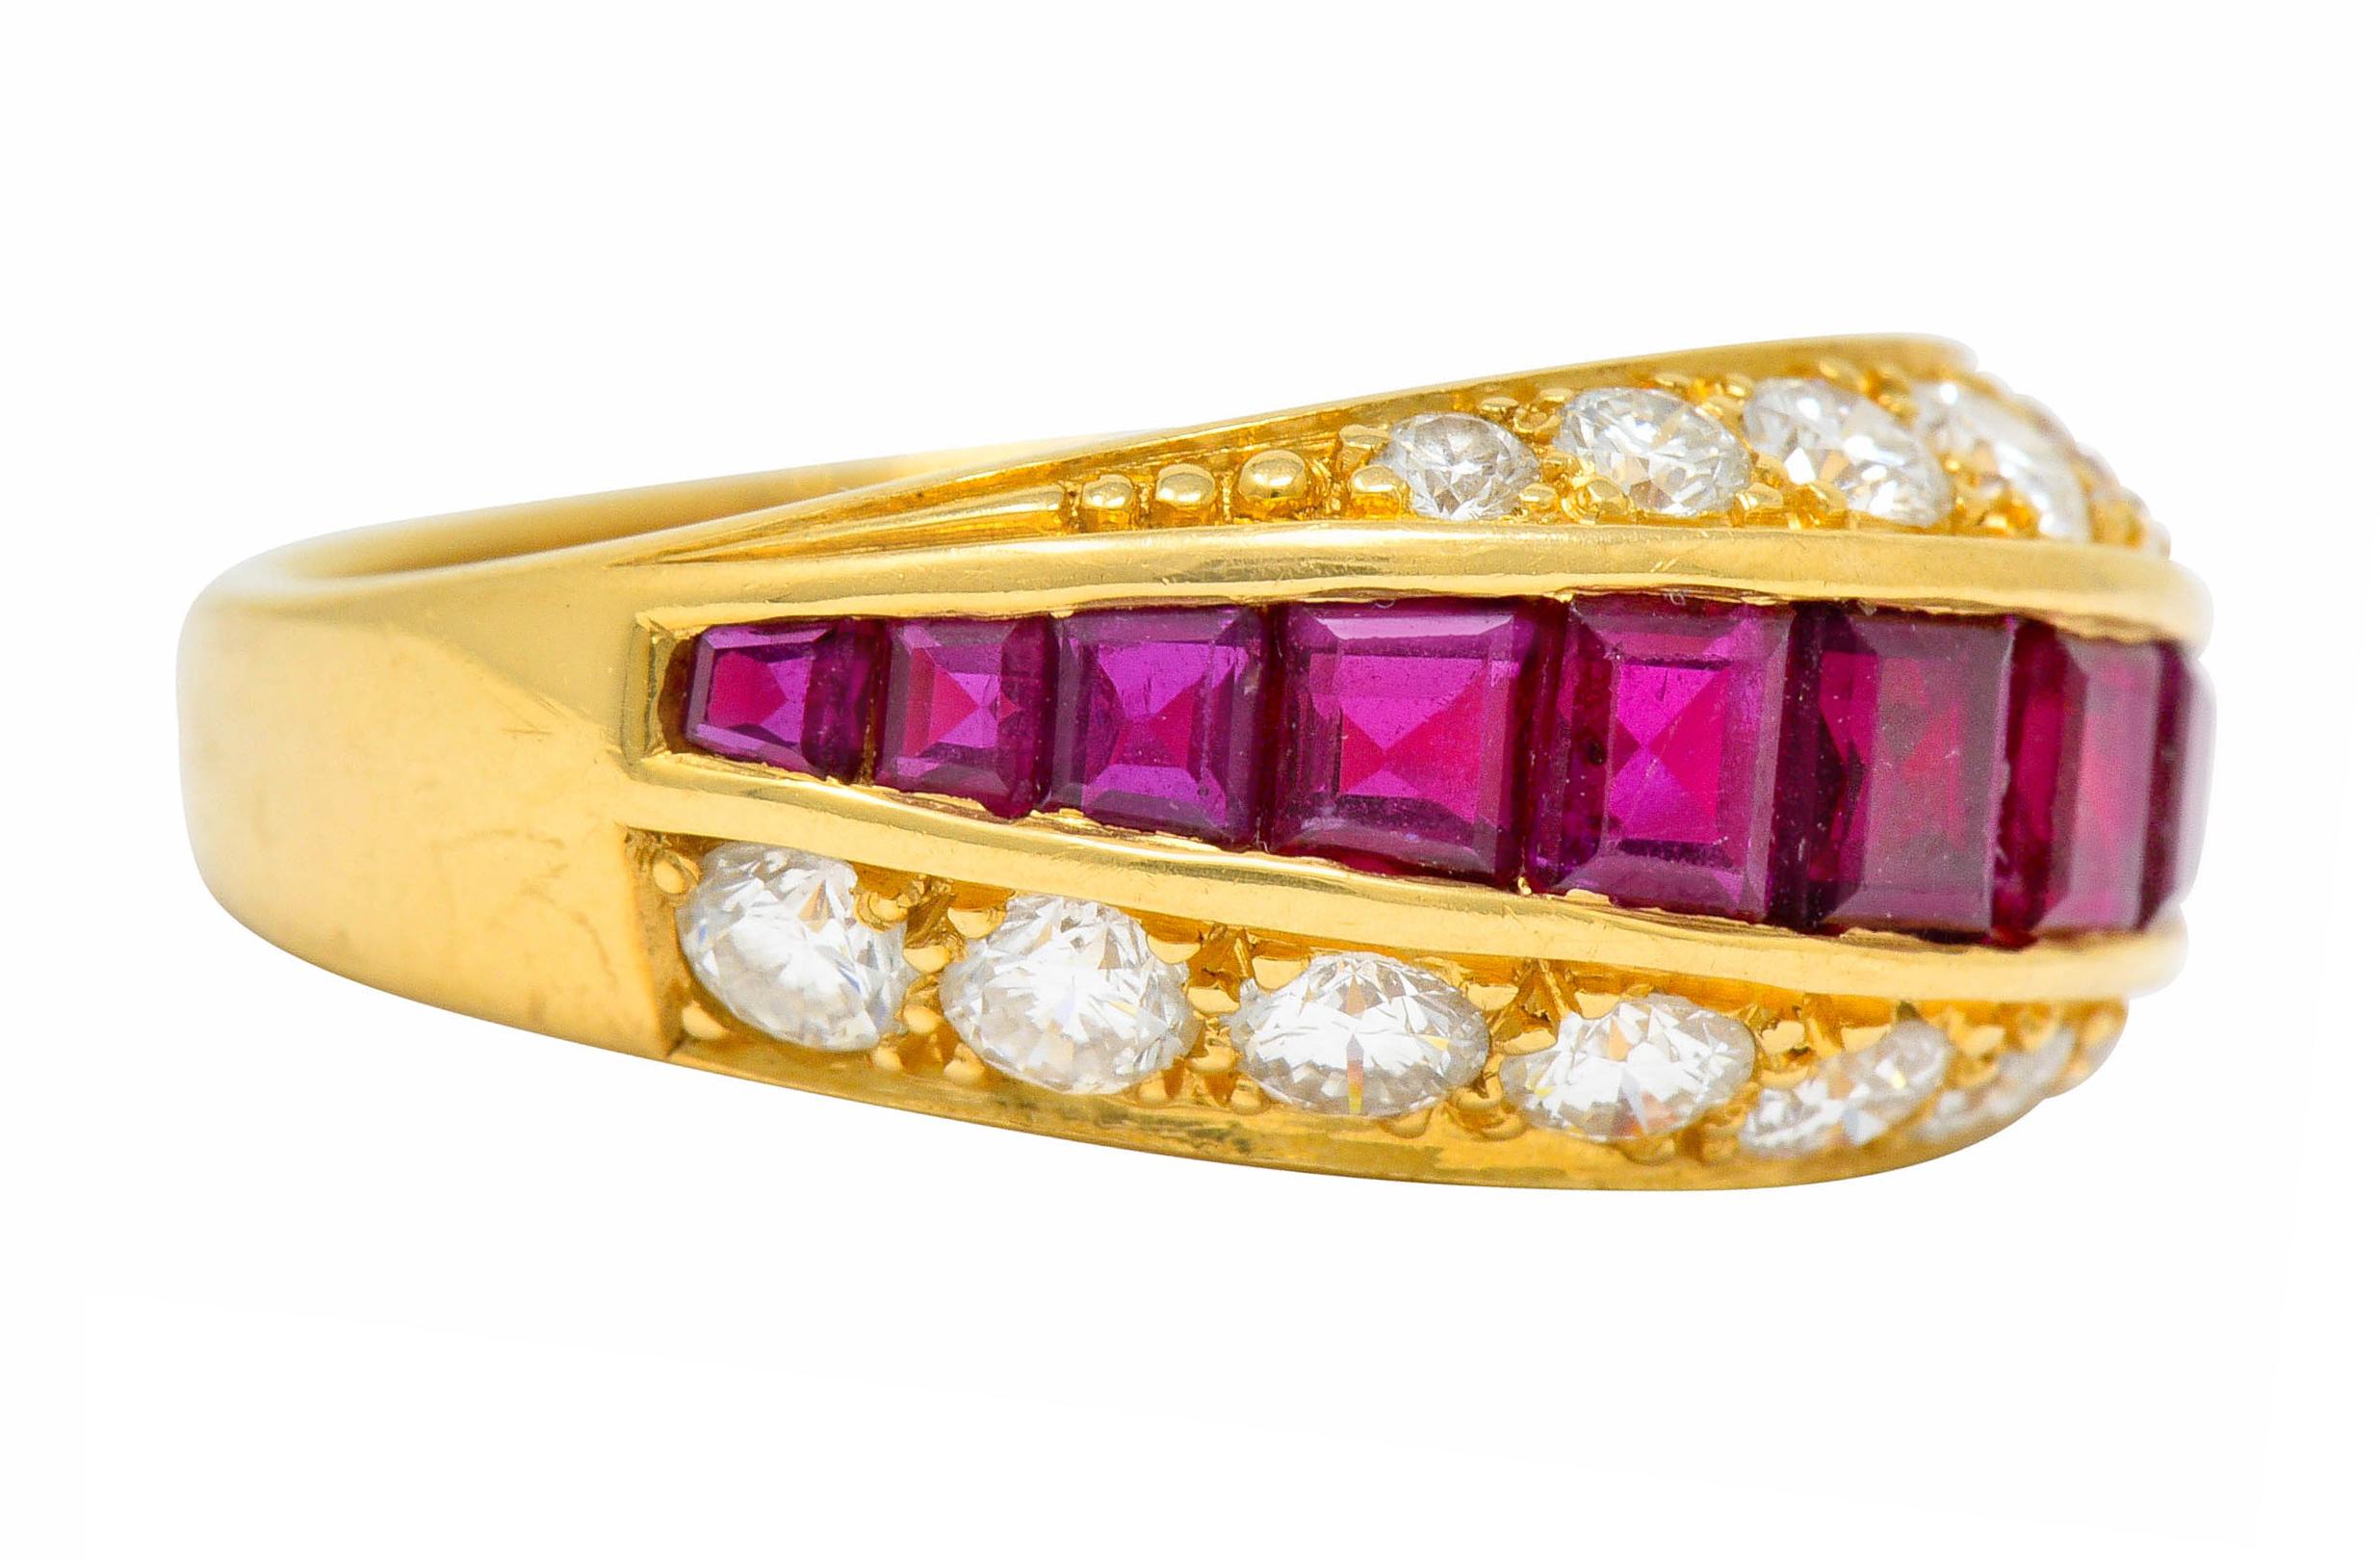 Band ring is designed as three rows of gemstones, slightly torqued

Centering calibrè cut ruby weighing approximately 1.25 carats; slightly purplish-red and very well-matched

Flanked North and South by bead set round brilliant cut diamonds weighing